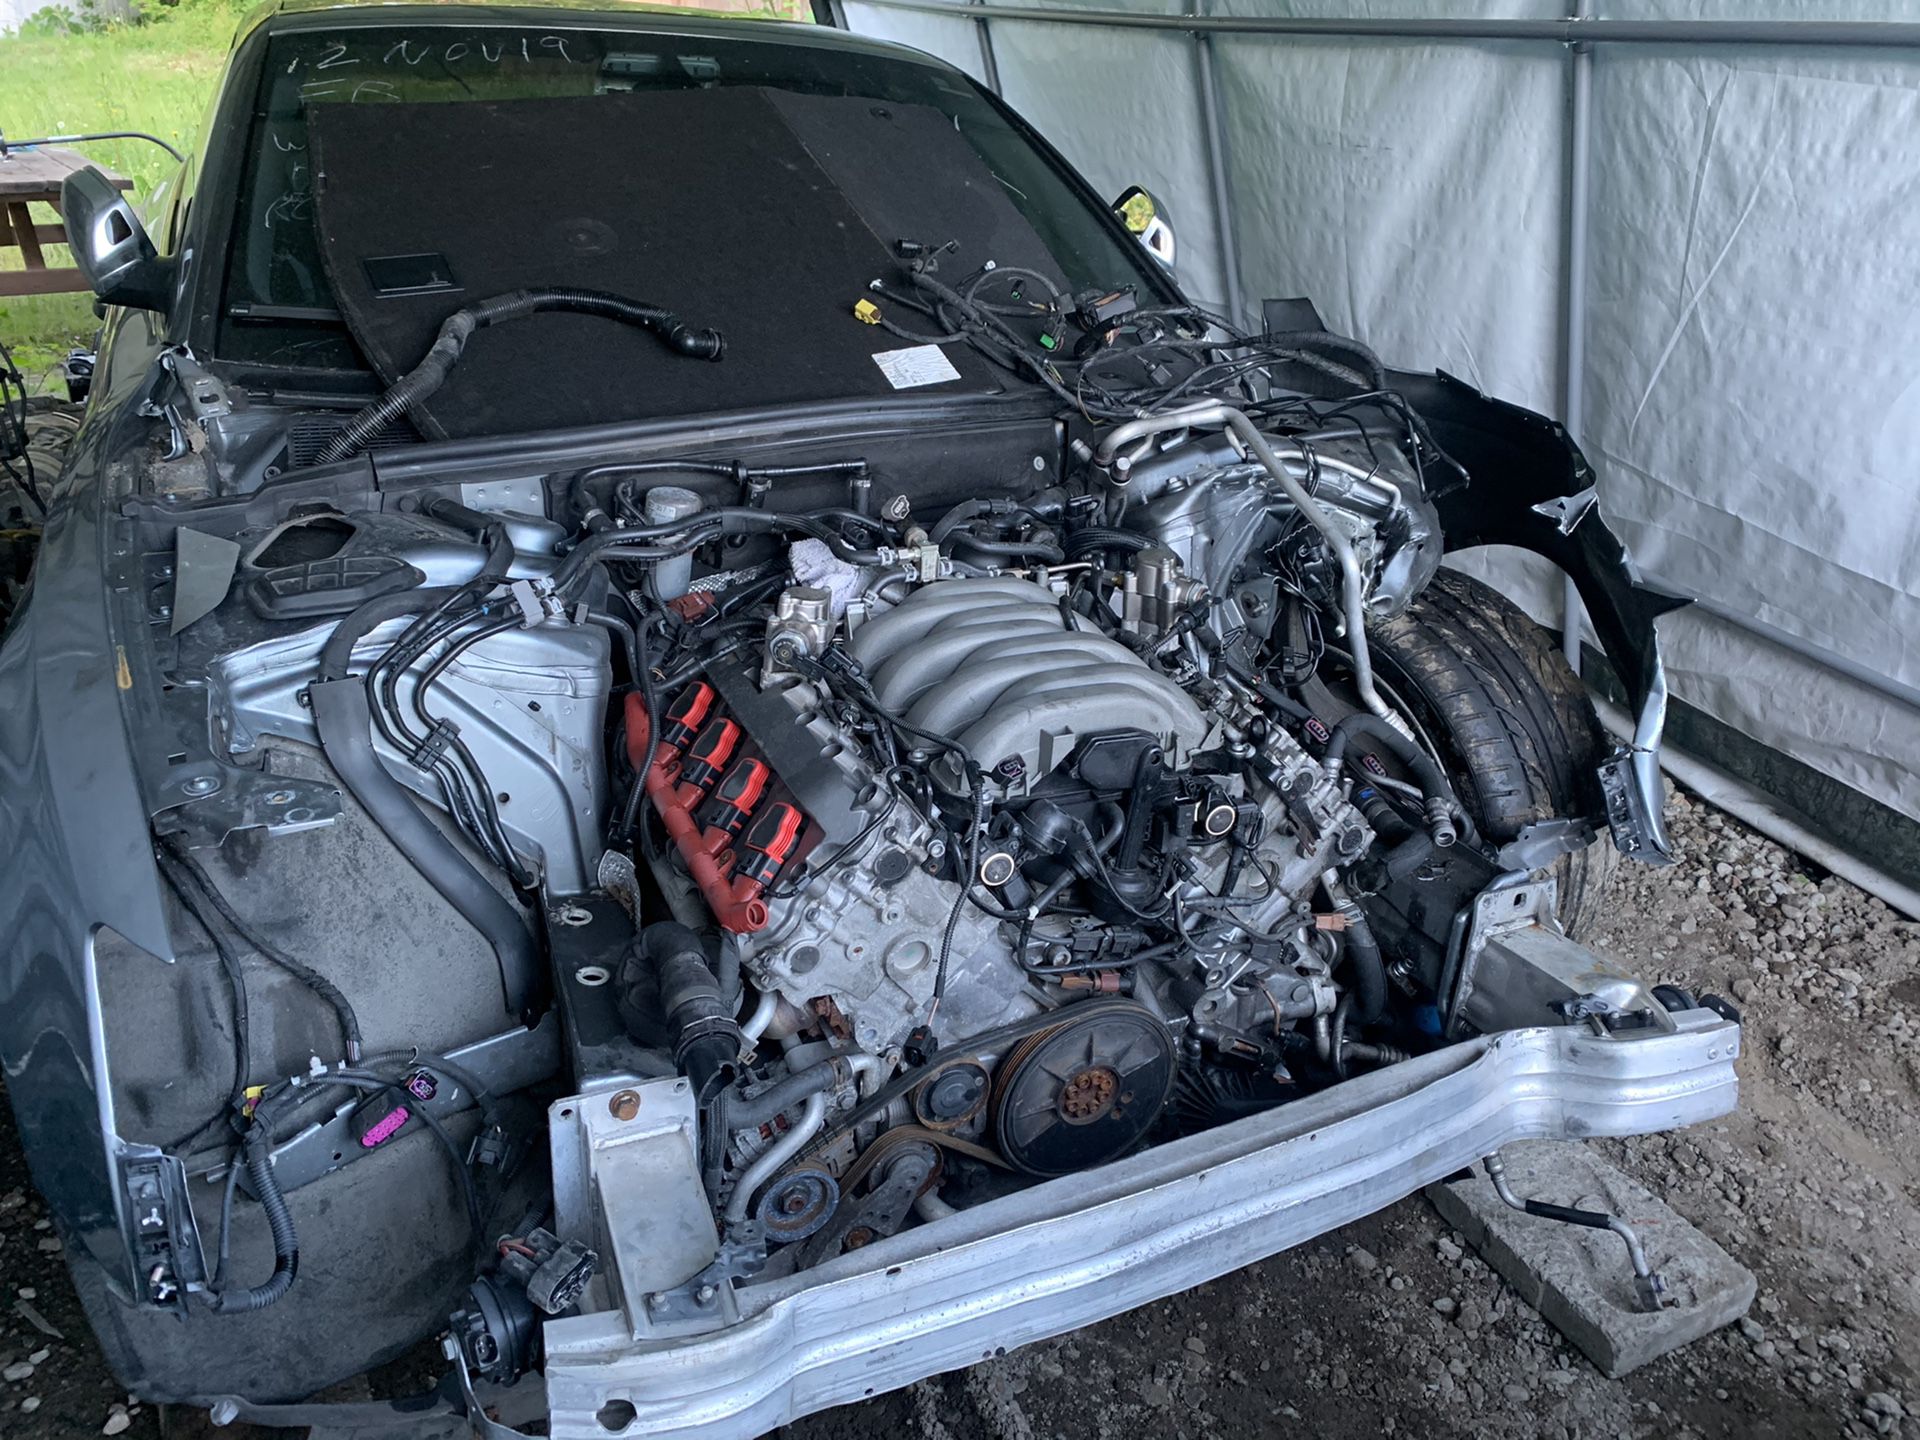 Audi s5 2011 parting out